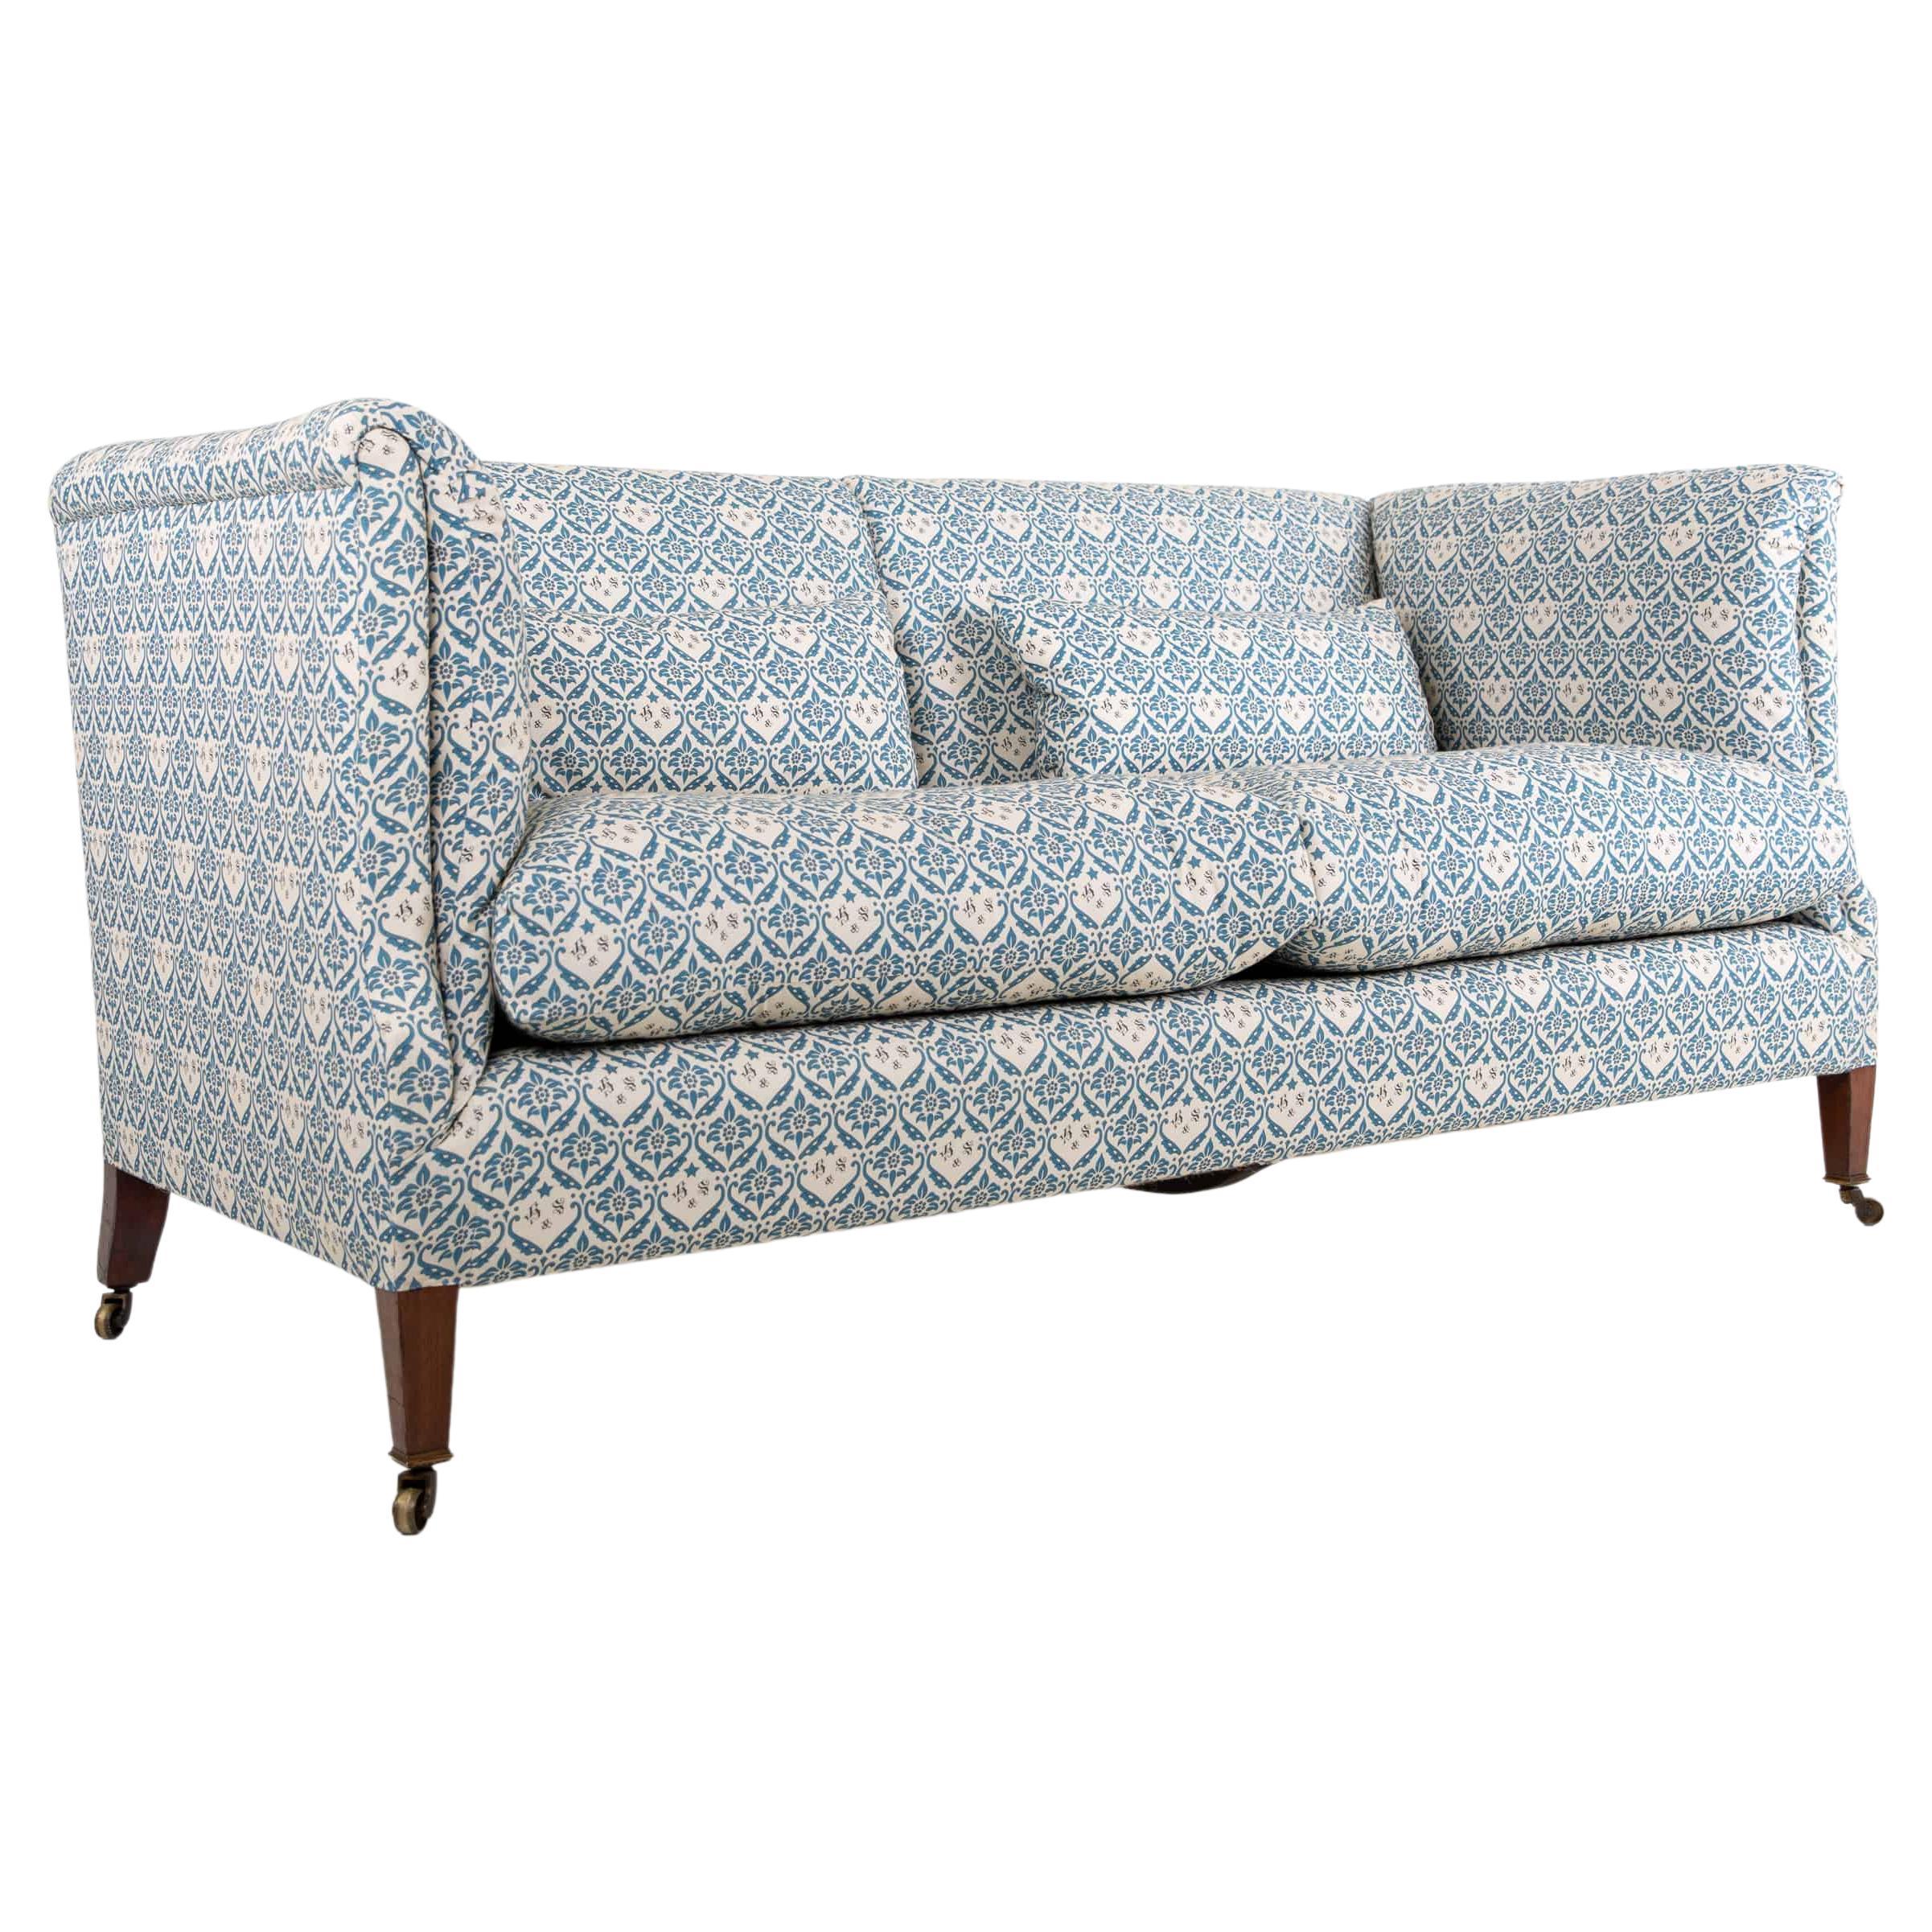 Antique English Country House Howard & Sons 'Castellane' Sofa Settee, C.1920